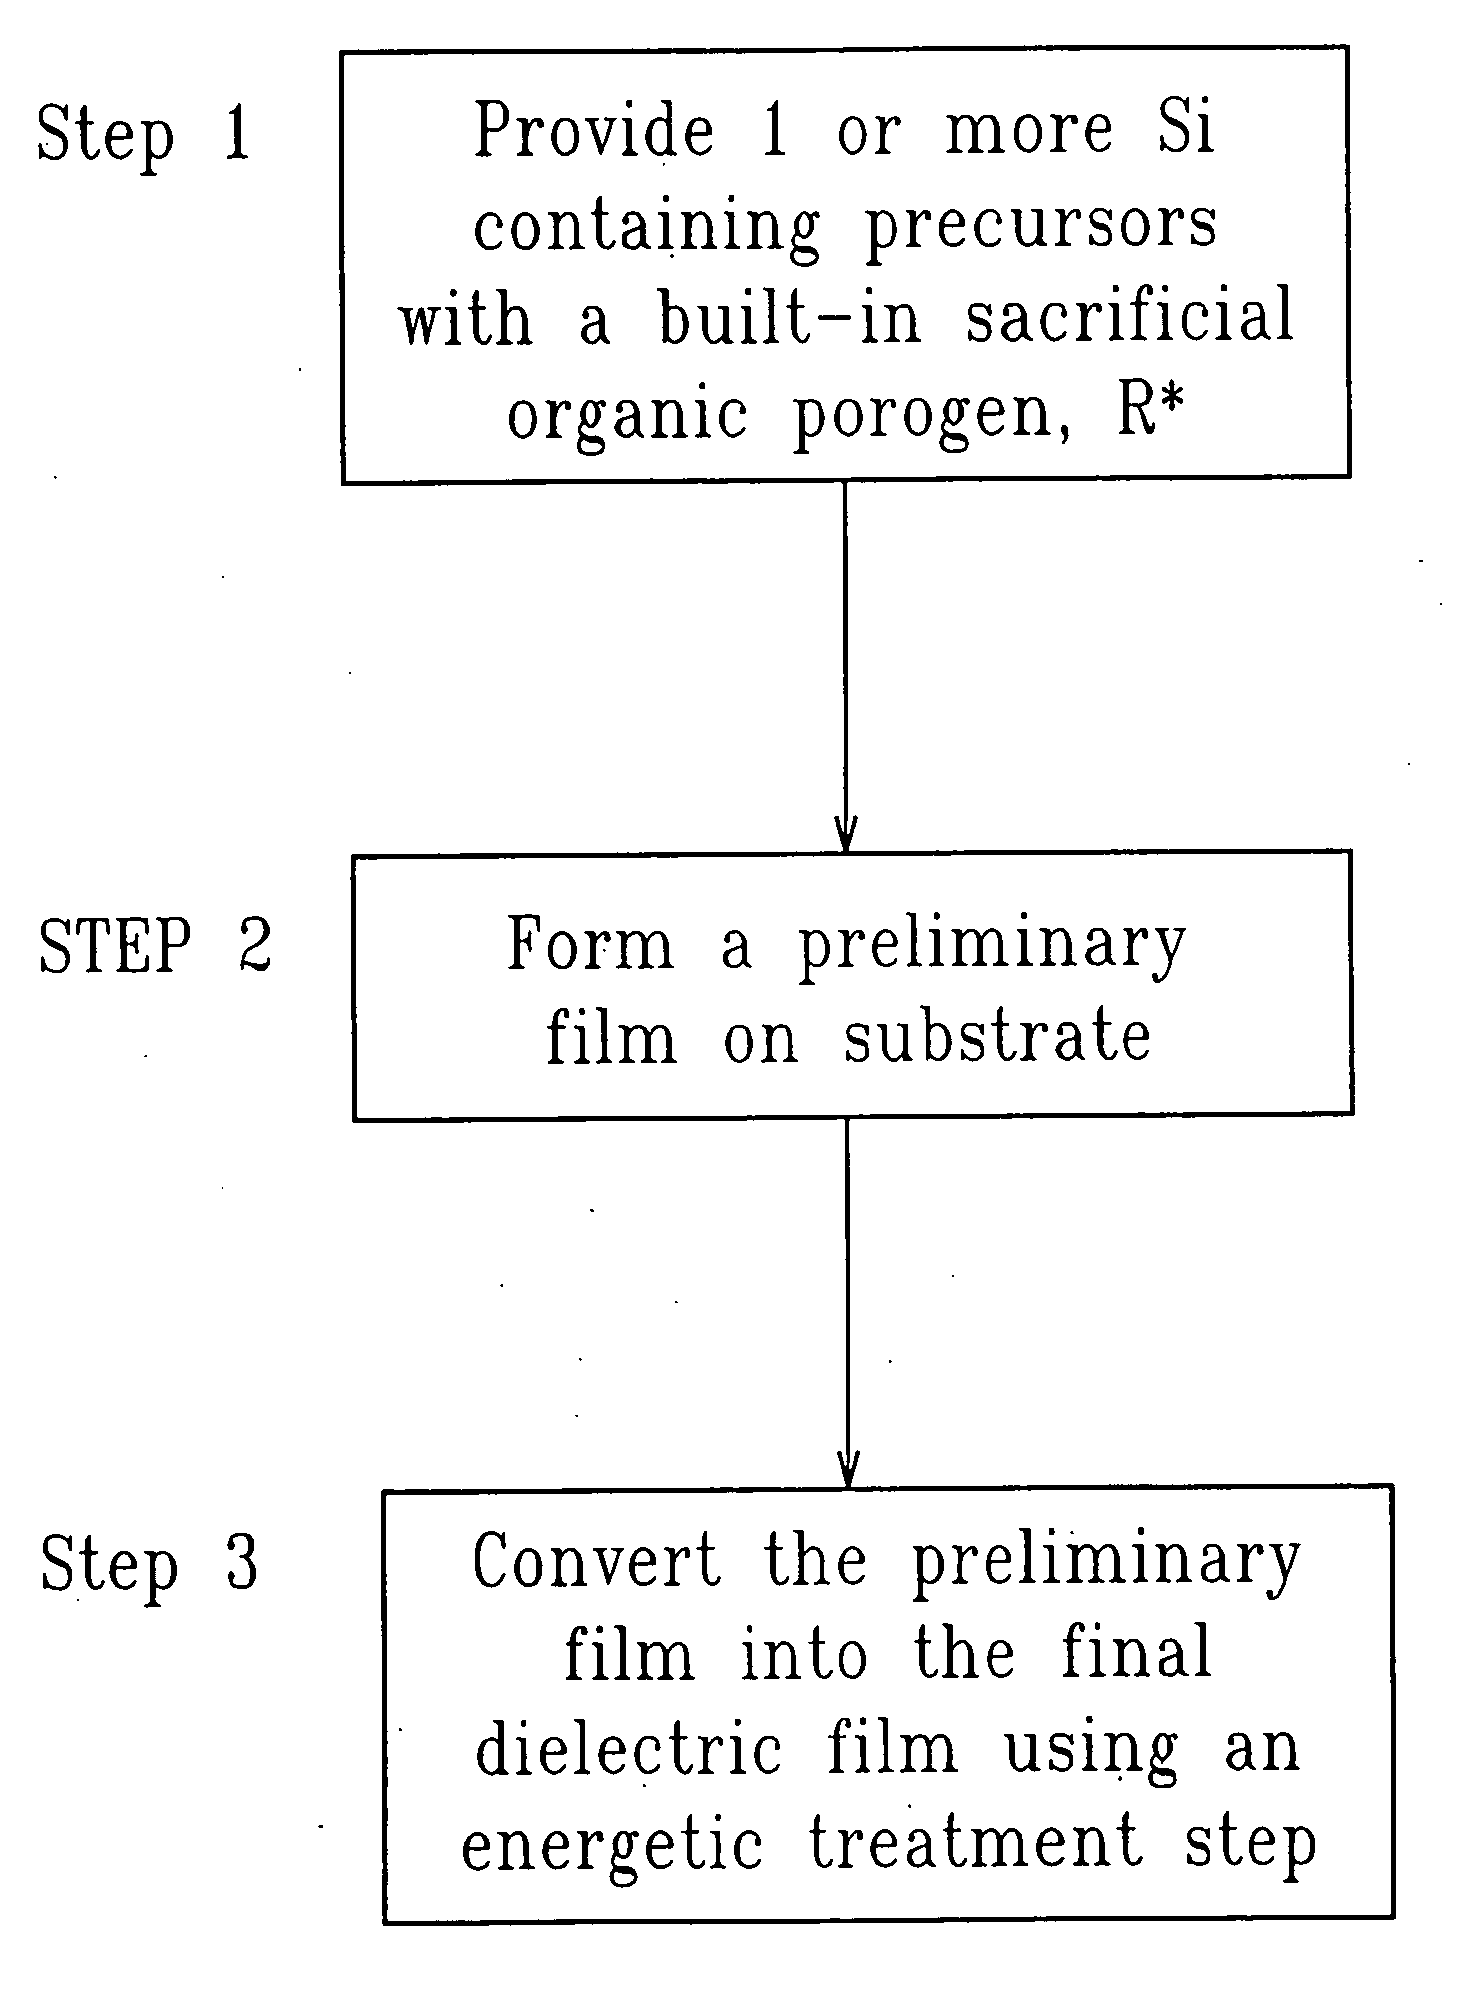 SiCOH film preparation using precursors with built-in porogen functionality